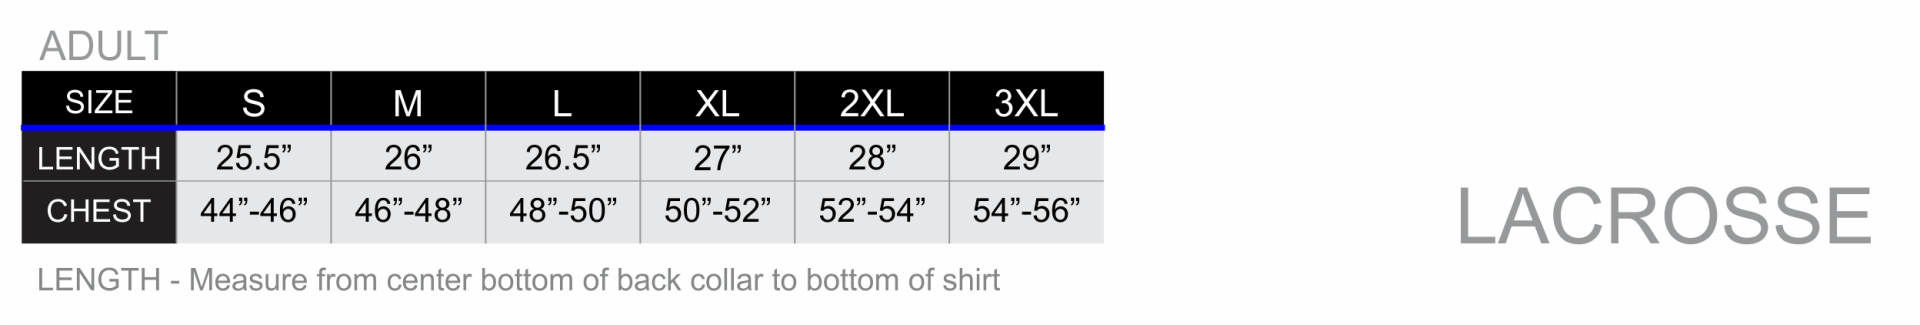 All over print lacrosse jersey sizing chart zexez